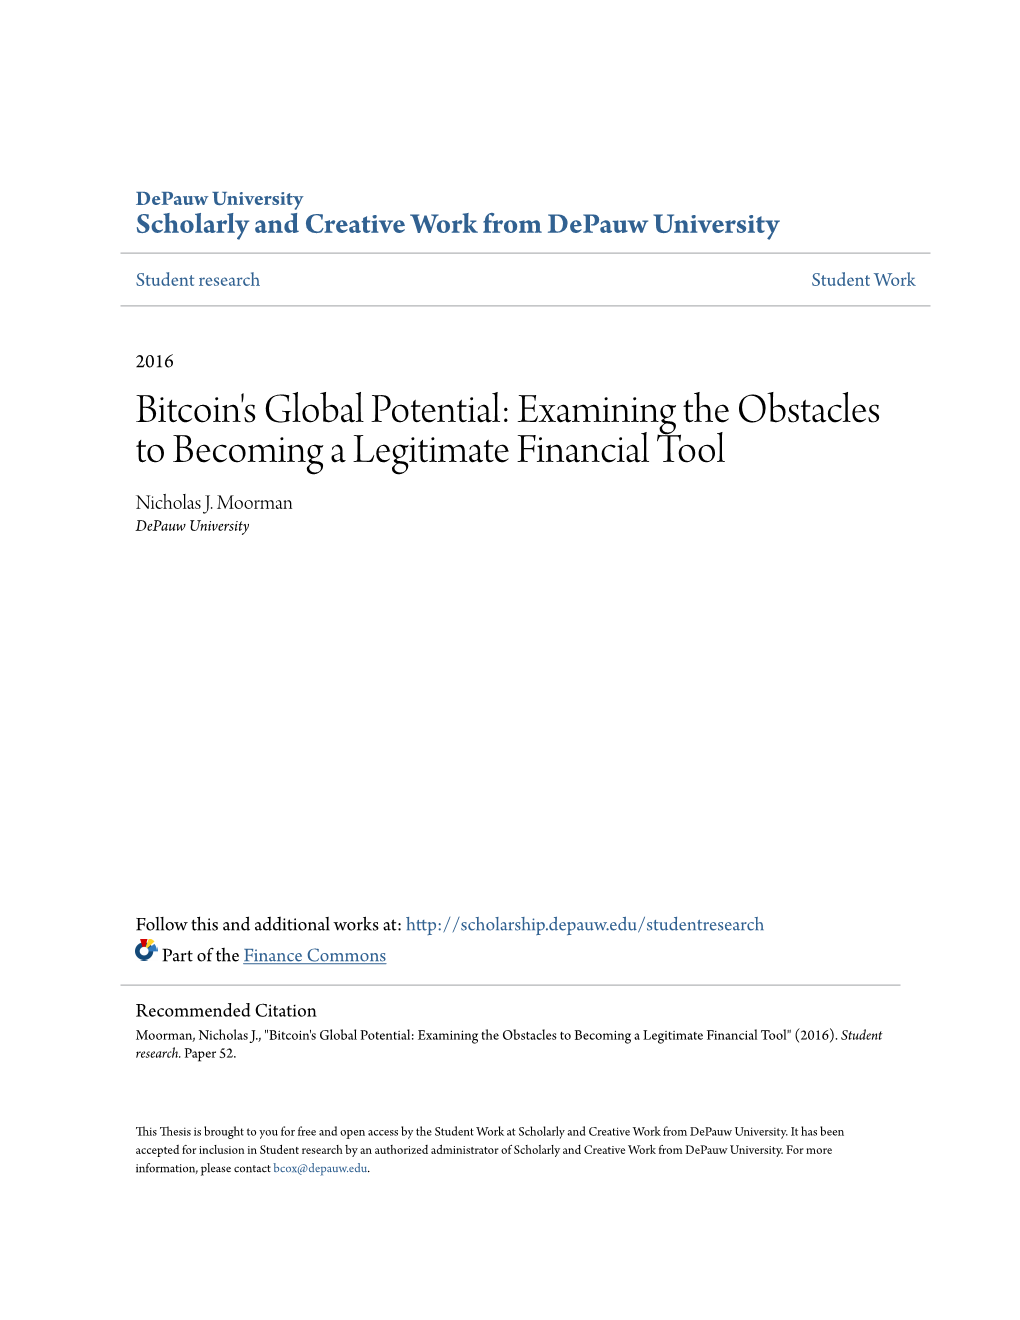 Bitcoin's Global Potential: Examining the Obstacles to Becoming a Legitimate Financial Tool Nicholas J